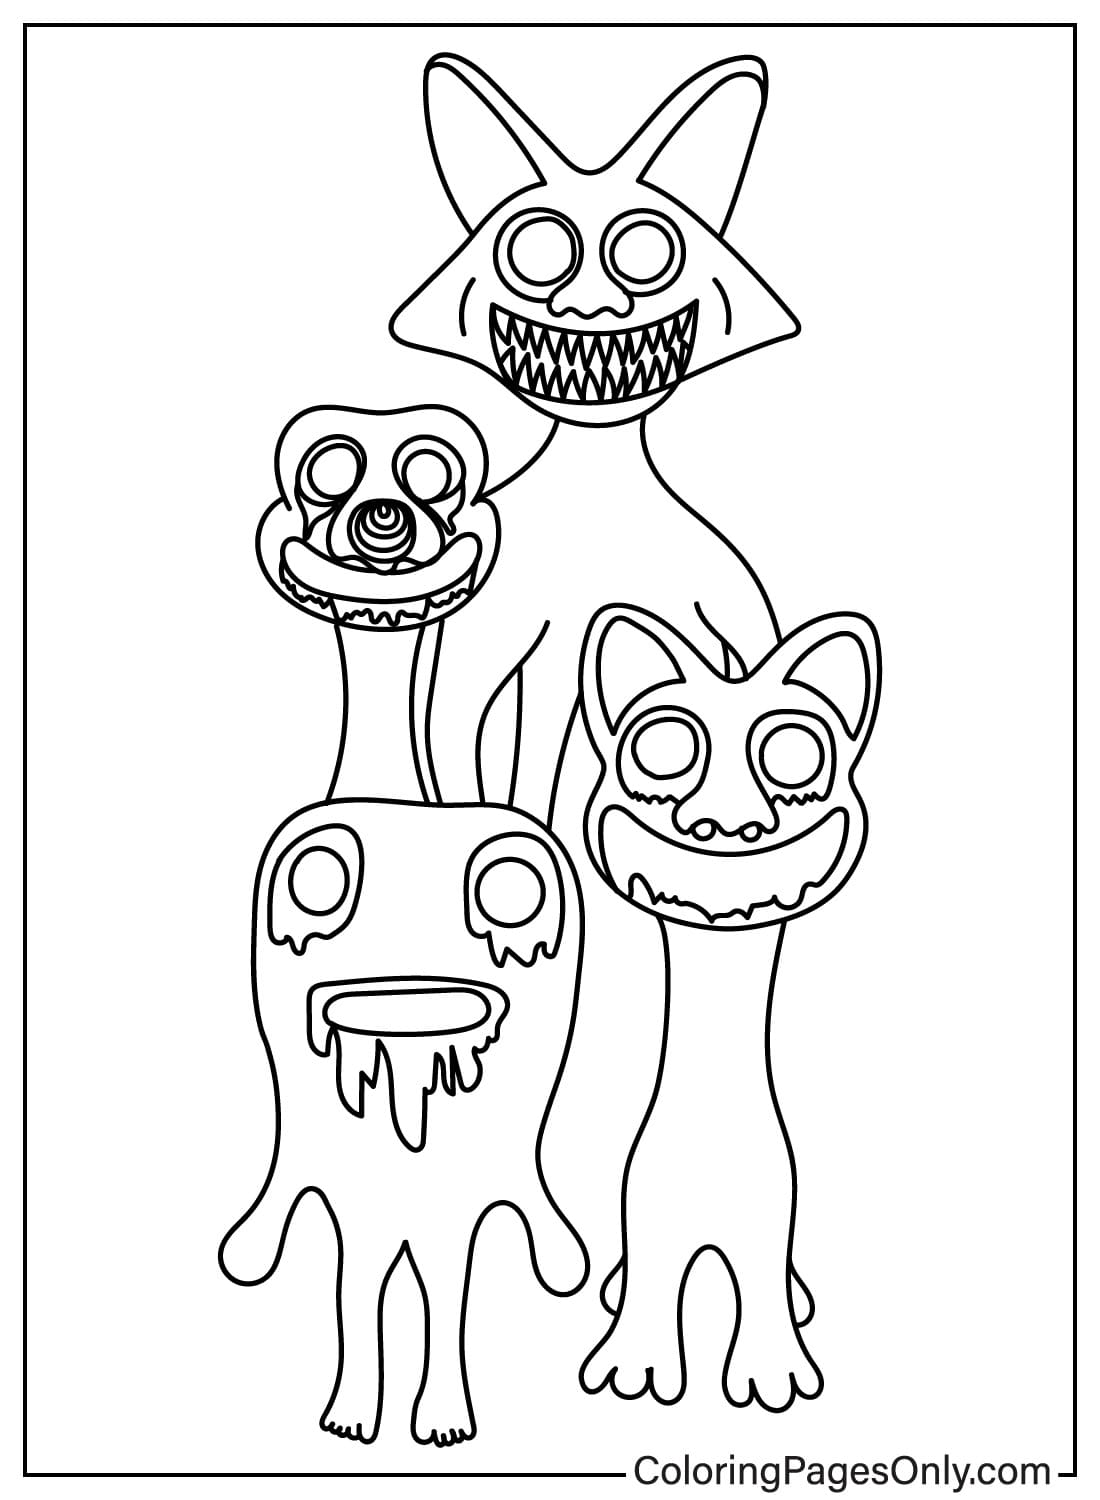 Zoonomaly Drawing Coloring Page from Zoonomaly